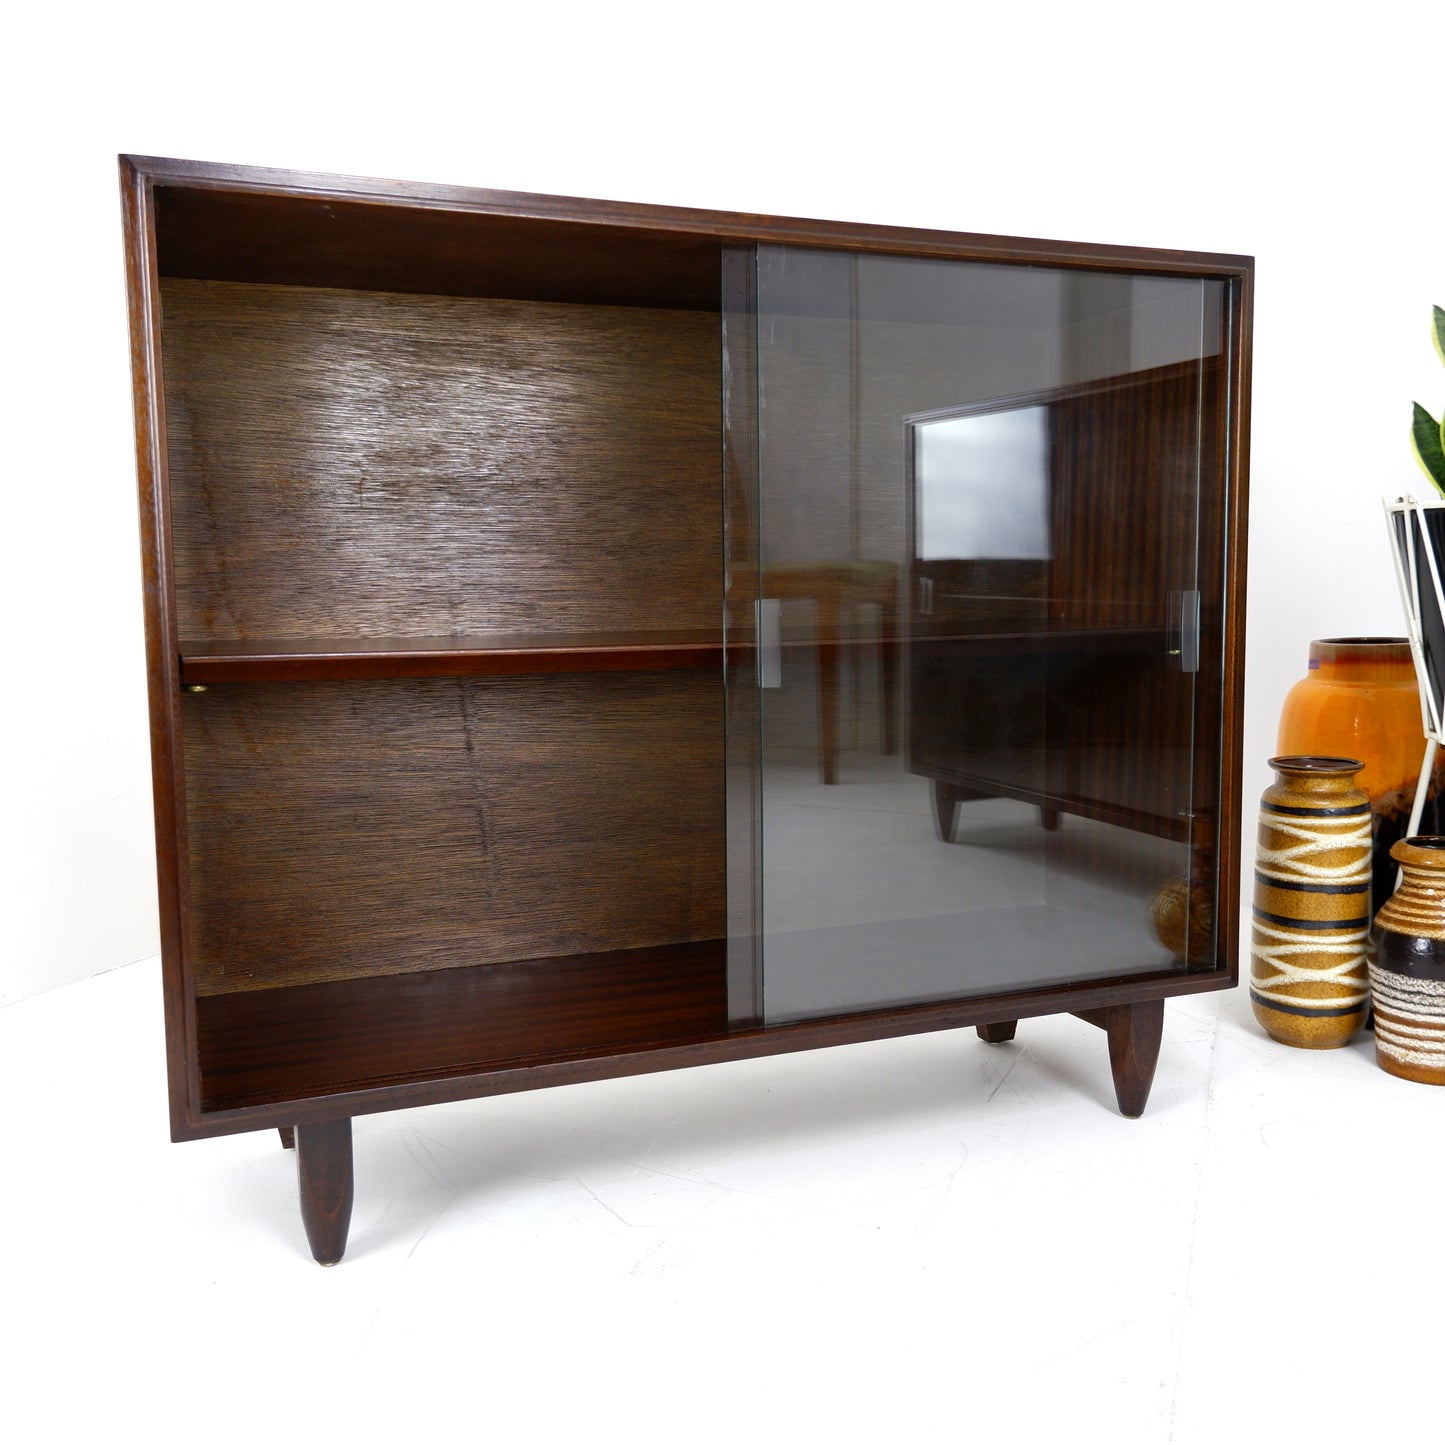 Pair of Mid Century Rosewood Bookcases / Display Cabinets by Beaver & Tapley Multi width